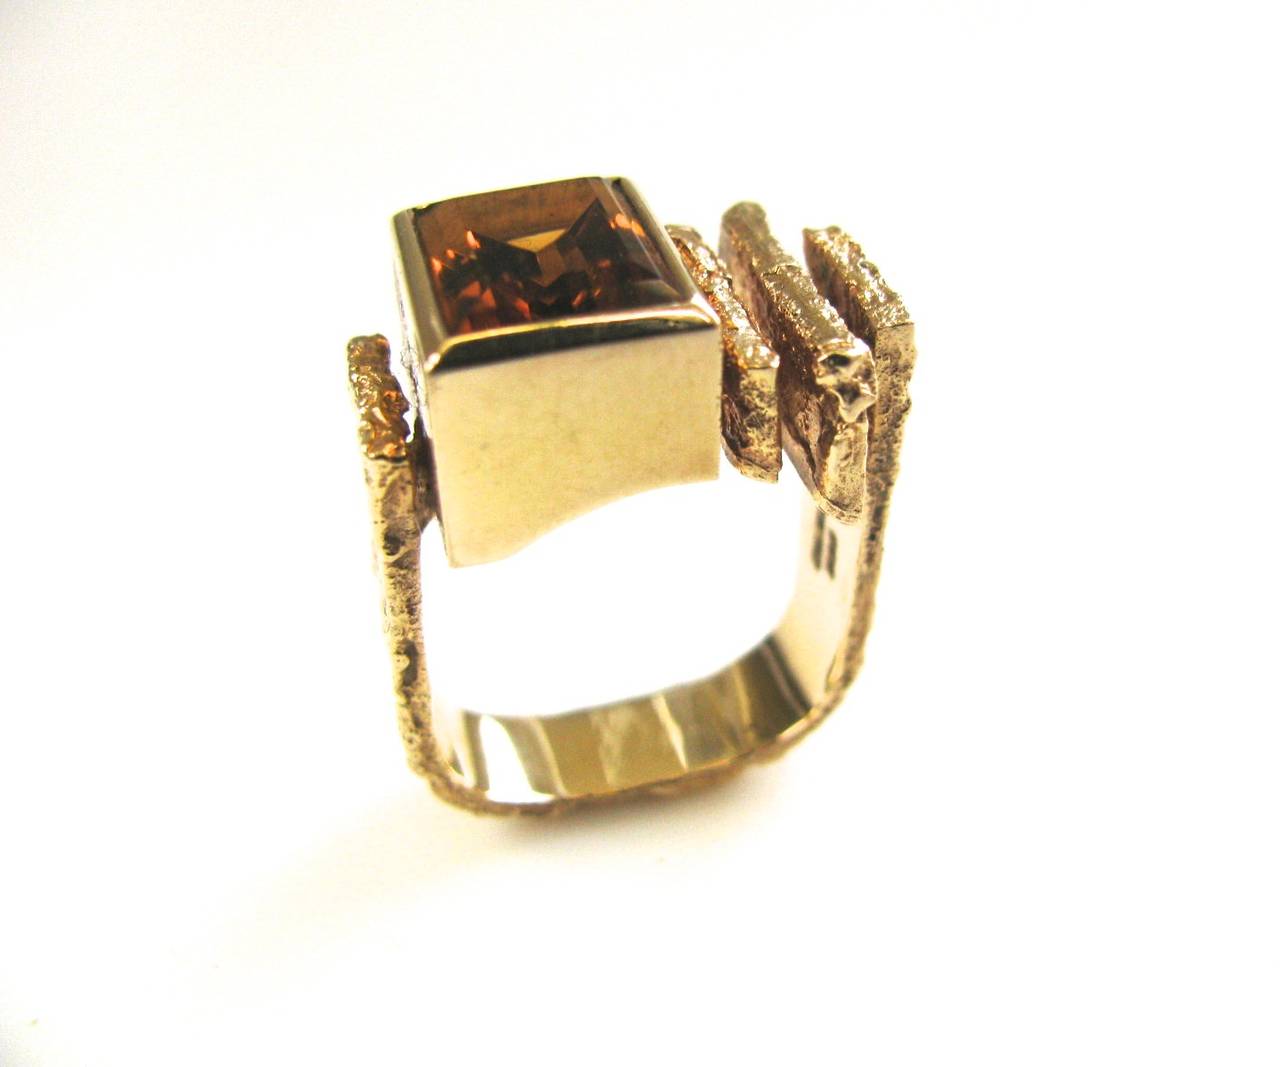 A handsome ring by Ole Lynggaard of Denmark. The 3/4" x 1/2" 14k textured yellow gold ring set with a rectangular shaped Madiera citrine in a polished box mount. A good-looking and easy to wear ring. Modernist and stylish.
Signed with